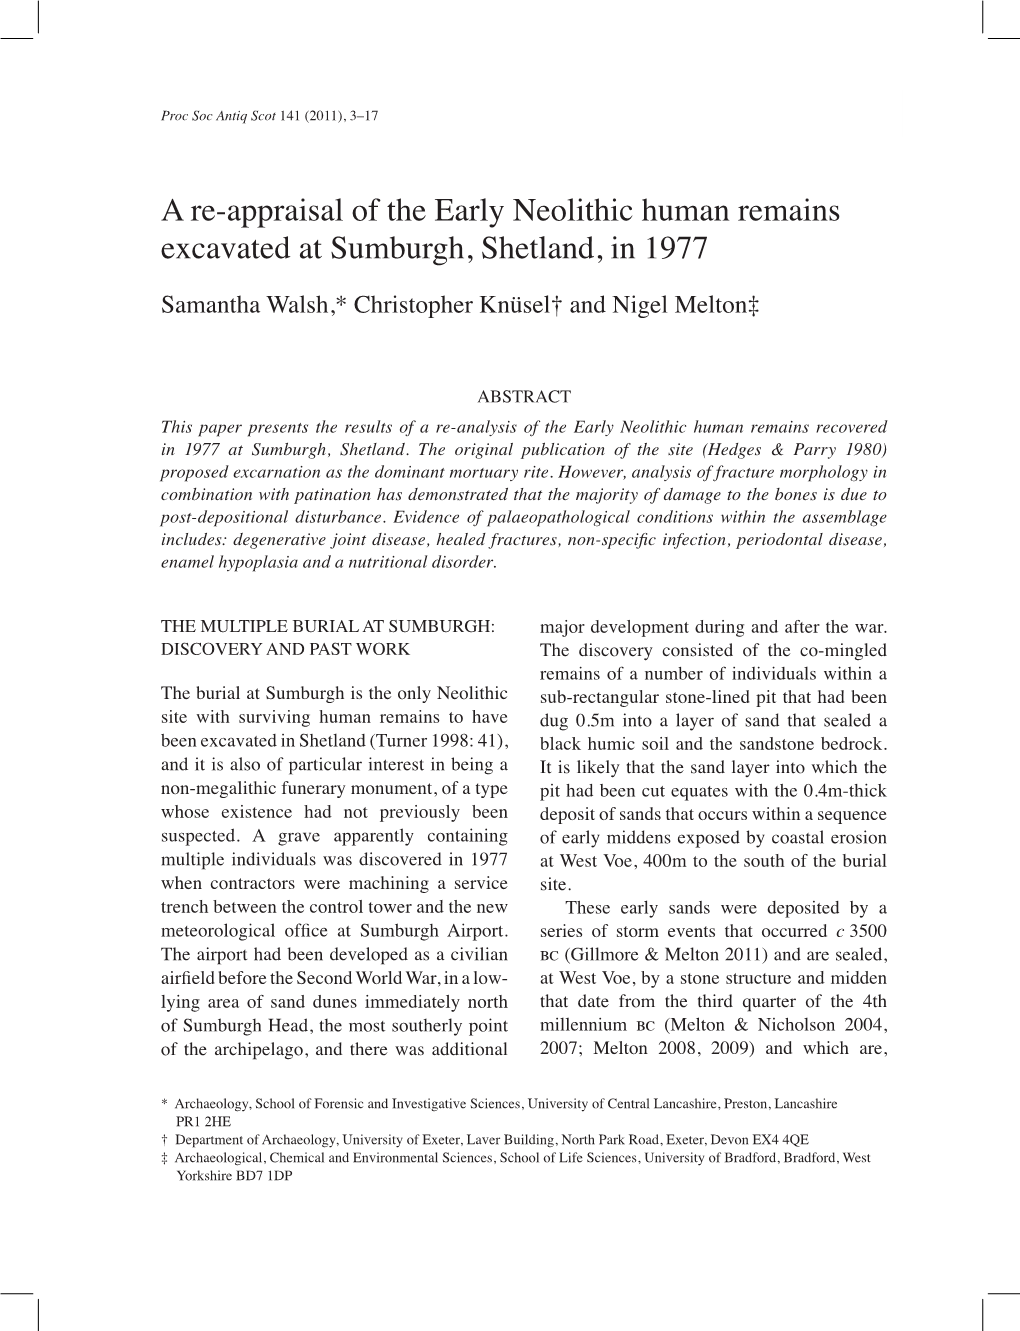 A Re-Appraisal of the Early Neolithic Human Remains Excavated at Sumburgh, Shetland, in 1977